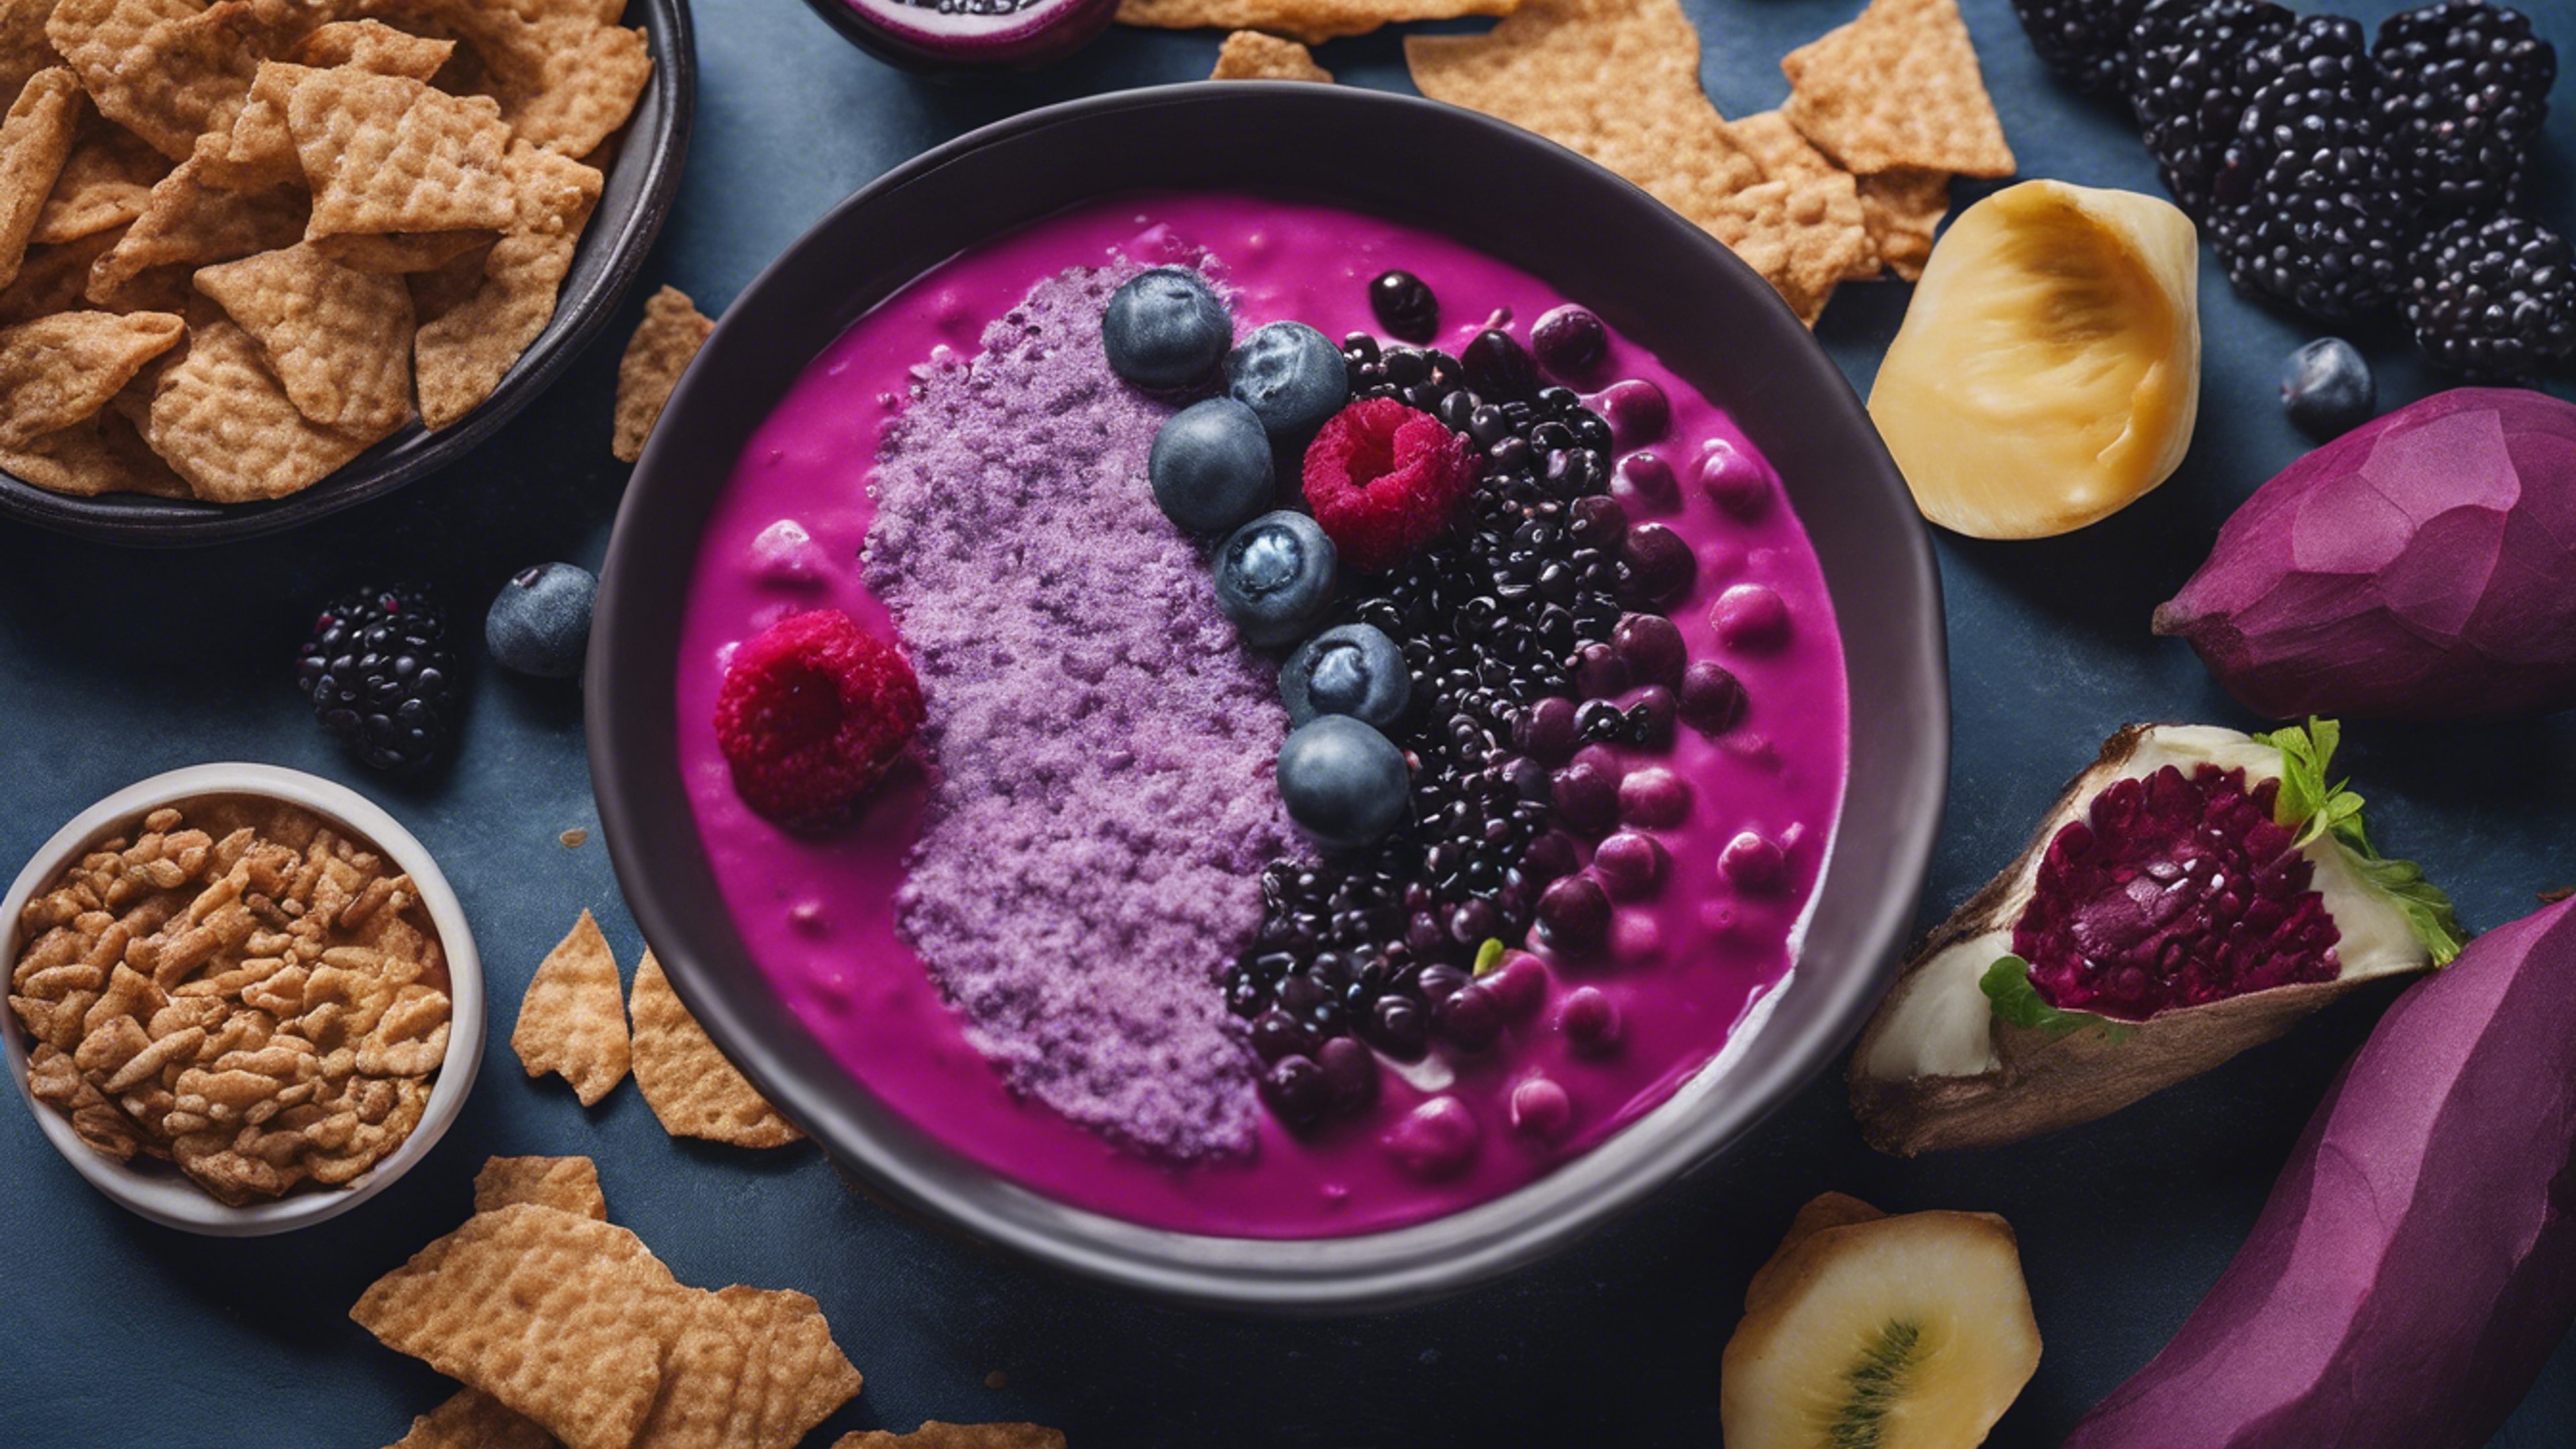 An eye-catching food collage, with purple foods like acai bowls, blue corn chips, and beetroot soup. Ფონი[72264552455b47748fee]